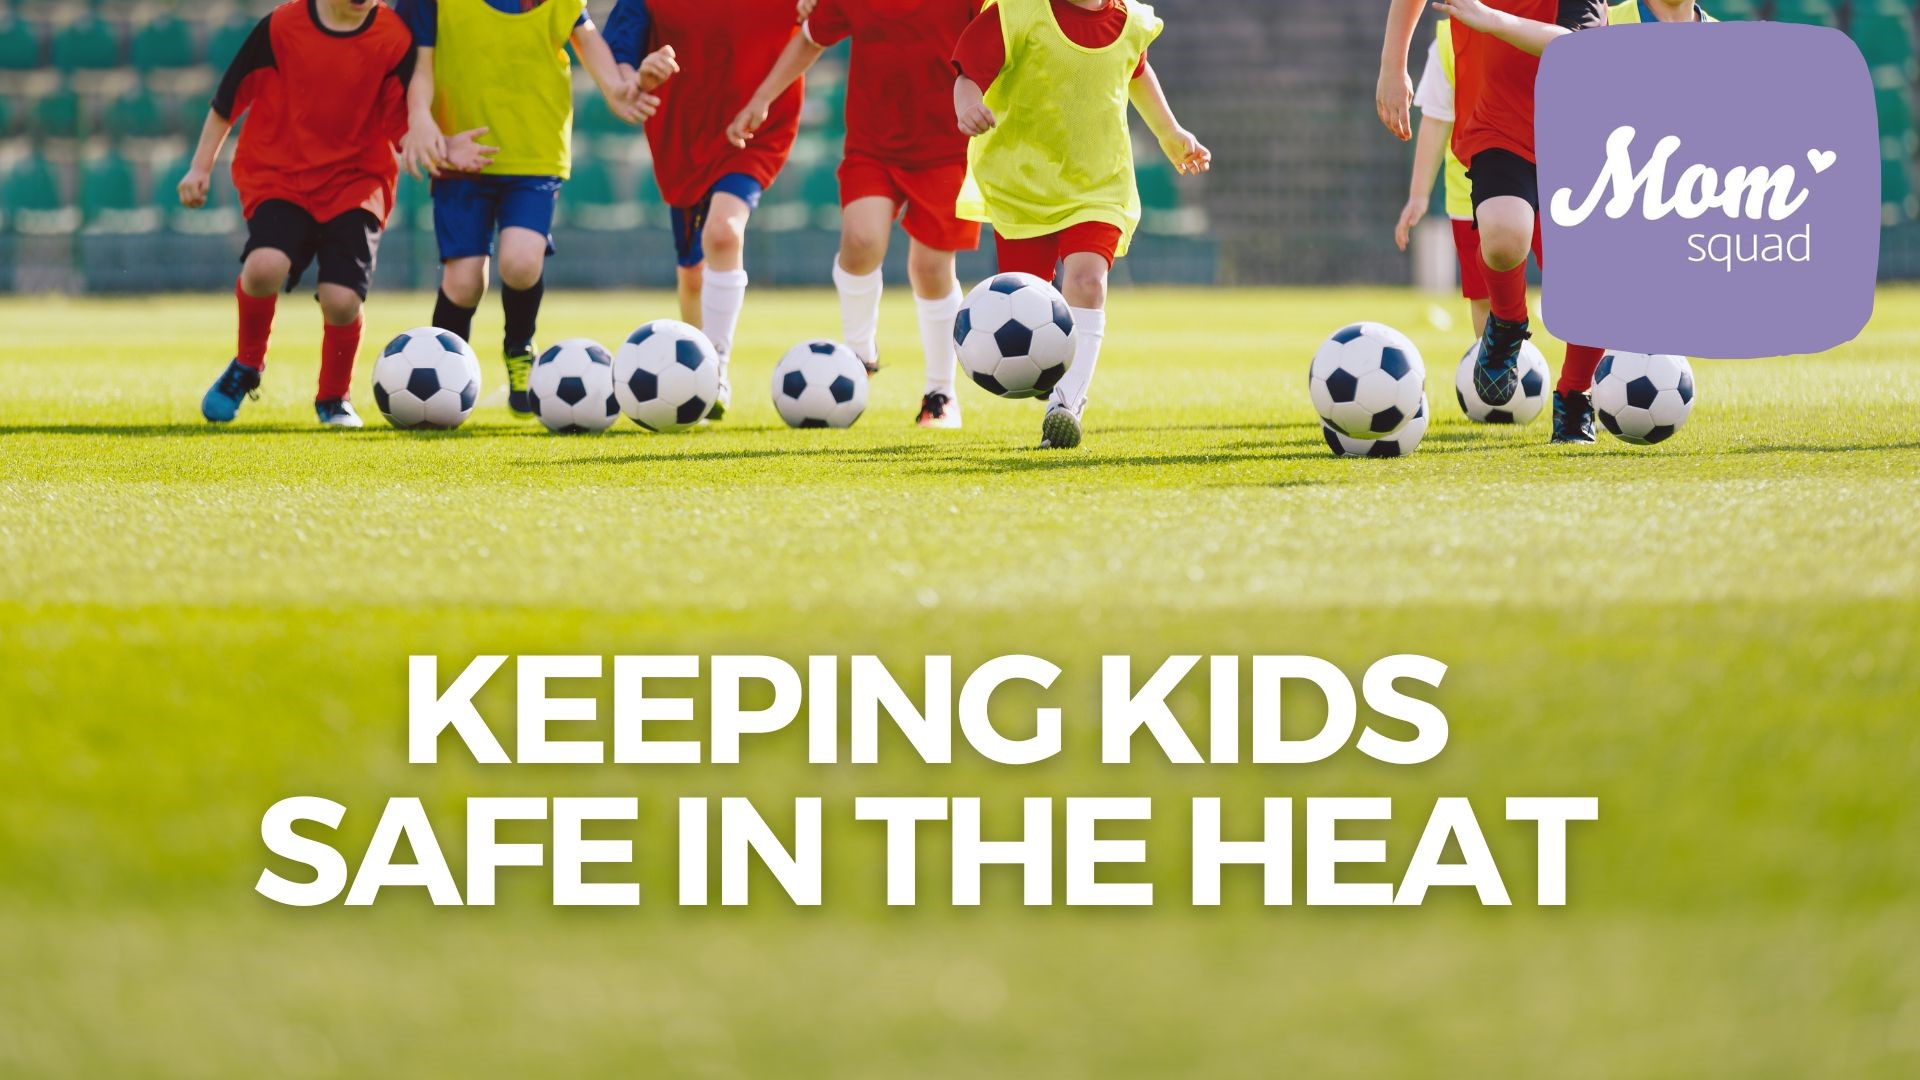 Maureen Kyle talks with a pediatric sports medicine doctor about the dangers of practicing in the heat, plus the safety tips all parents and coaches need to know.